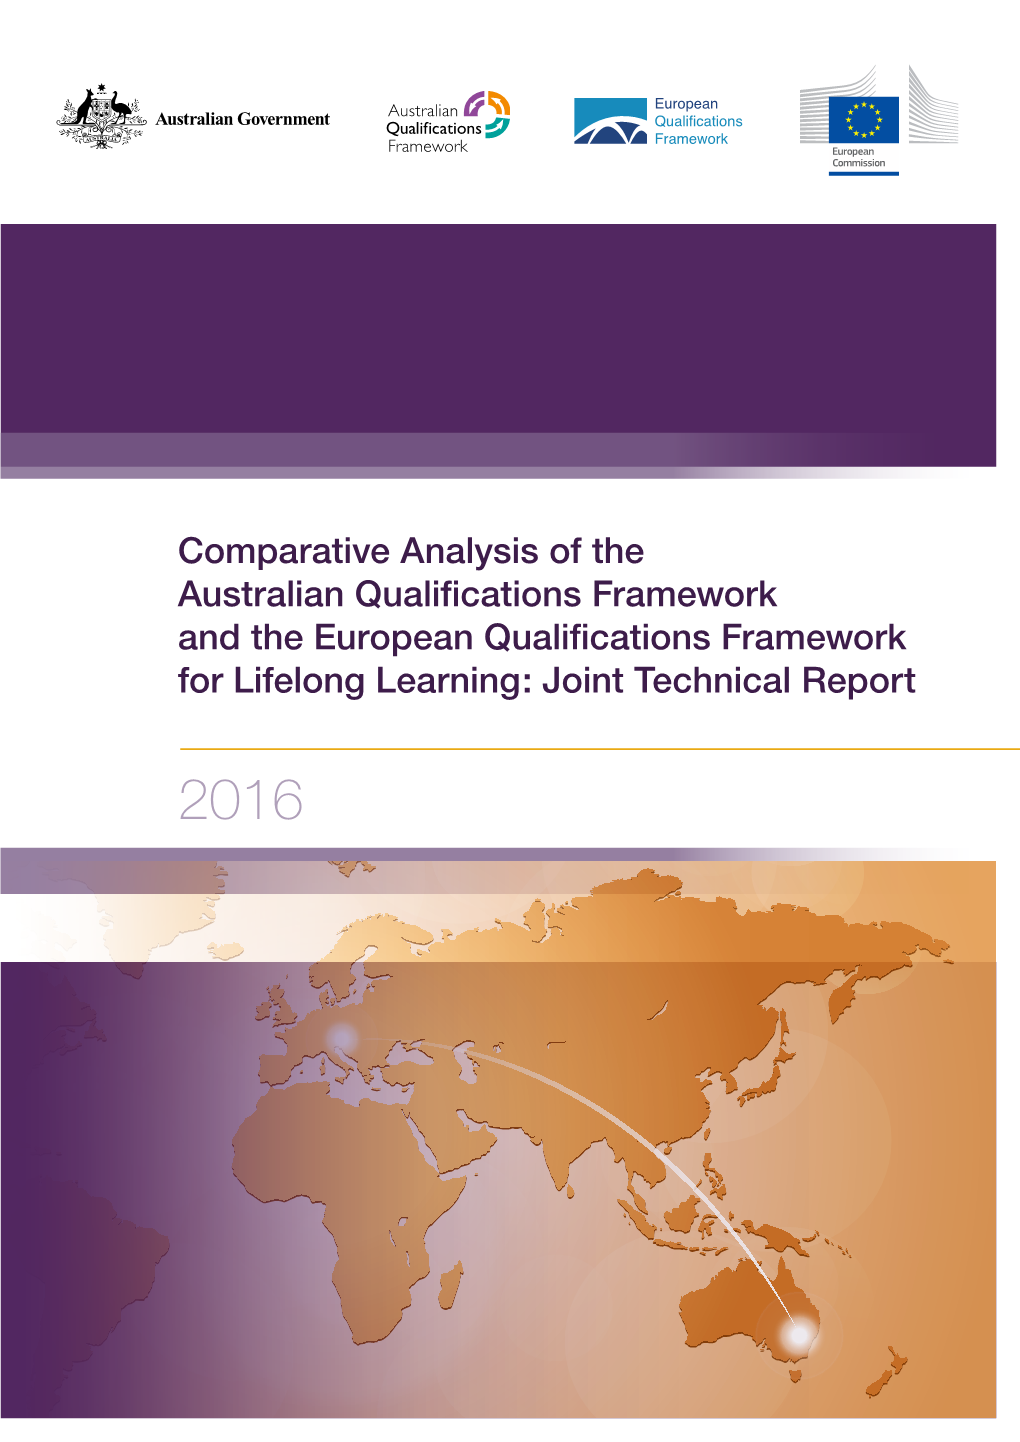 Comparative Analysis of the Australian Qualifications Framework and the European Qualifications Framework for Lifelong Learning: Joint Technical Report